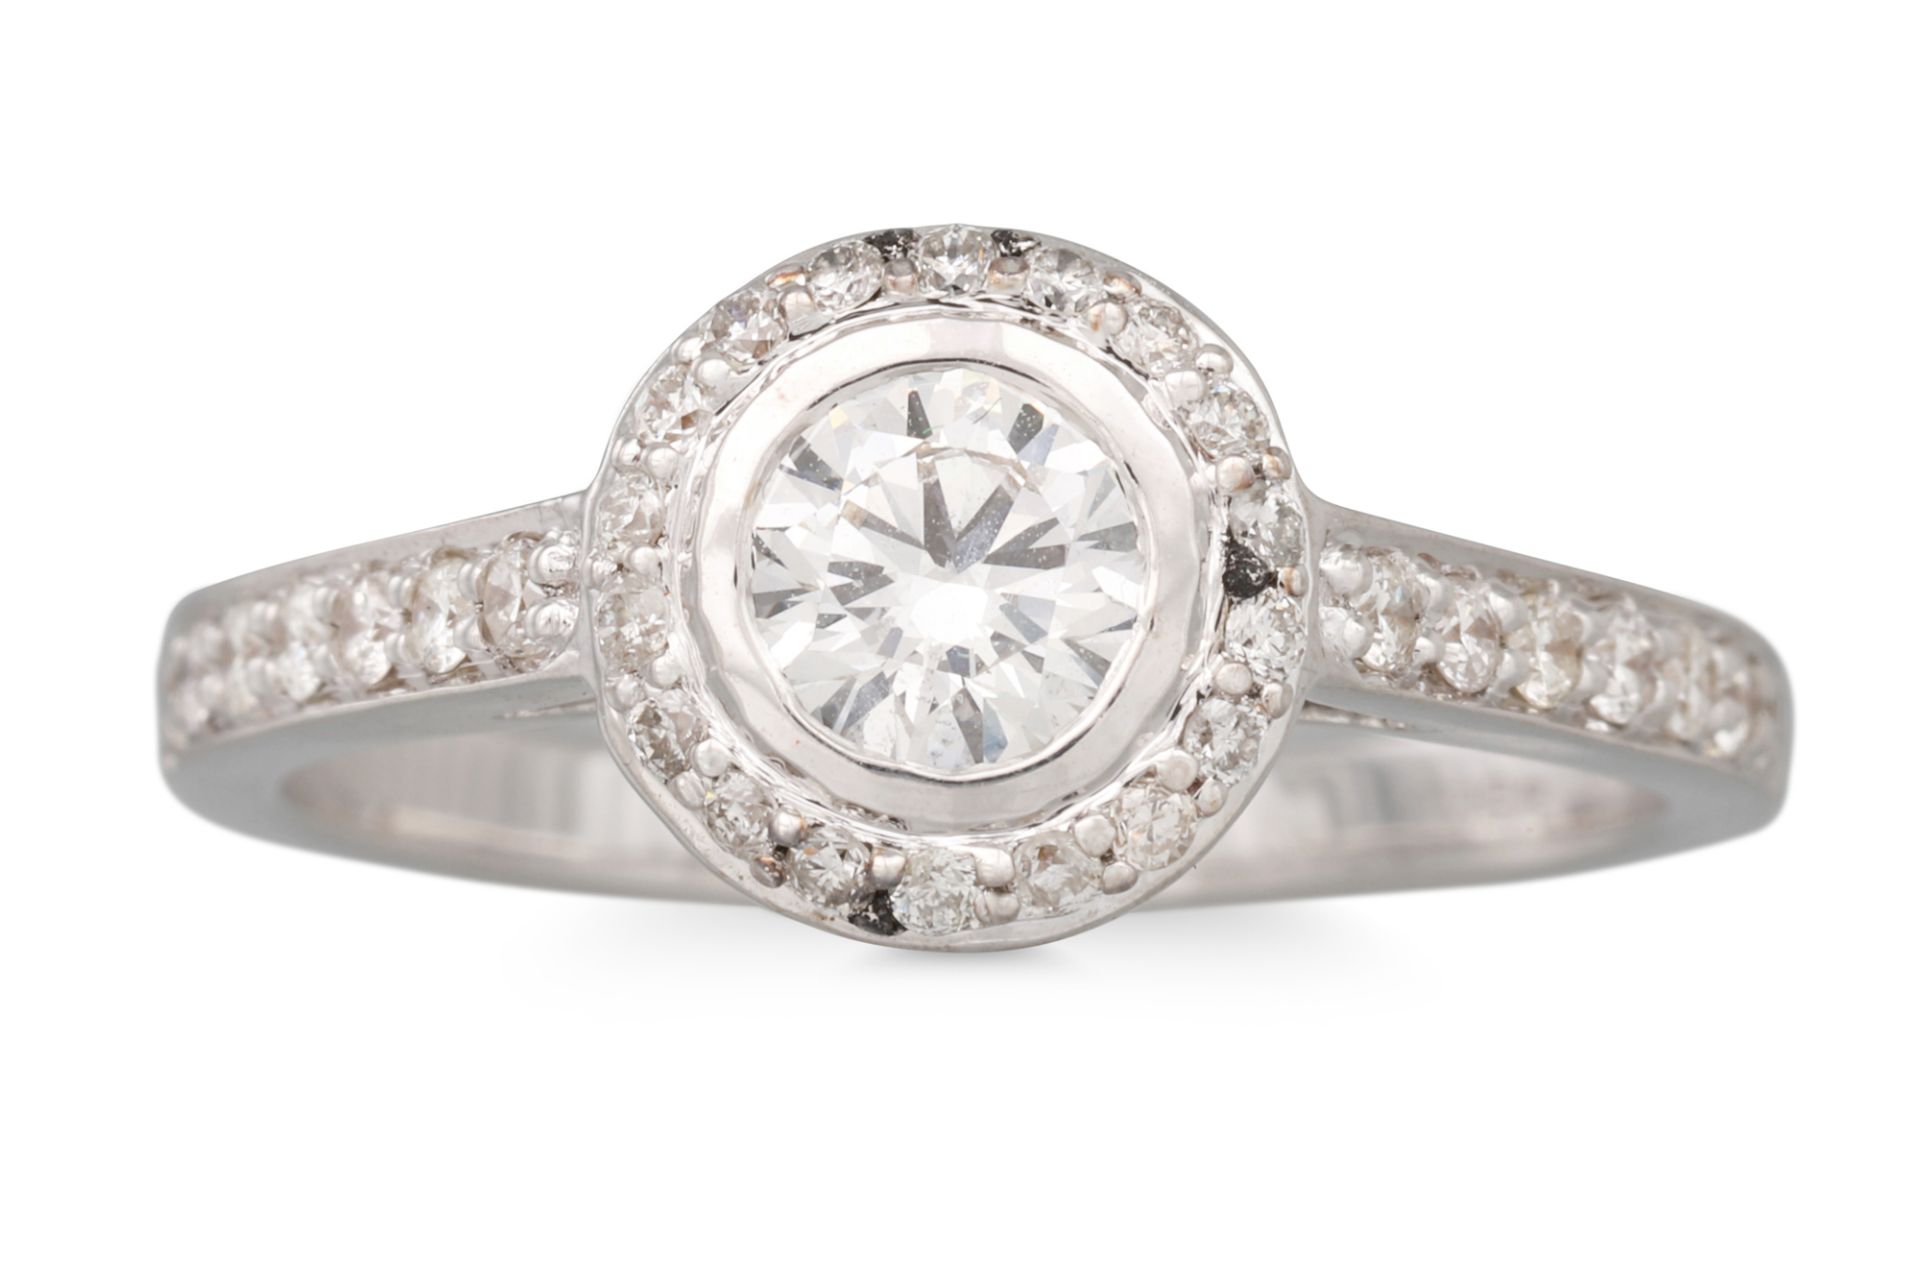 A DIAMOND HALO CLUSTER RING, set with brilliant cut diamonds, mounted in 18ct white gold. Estimated: